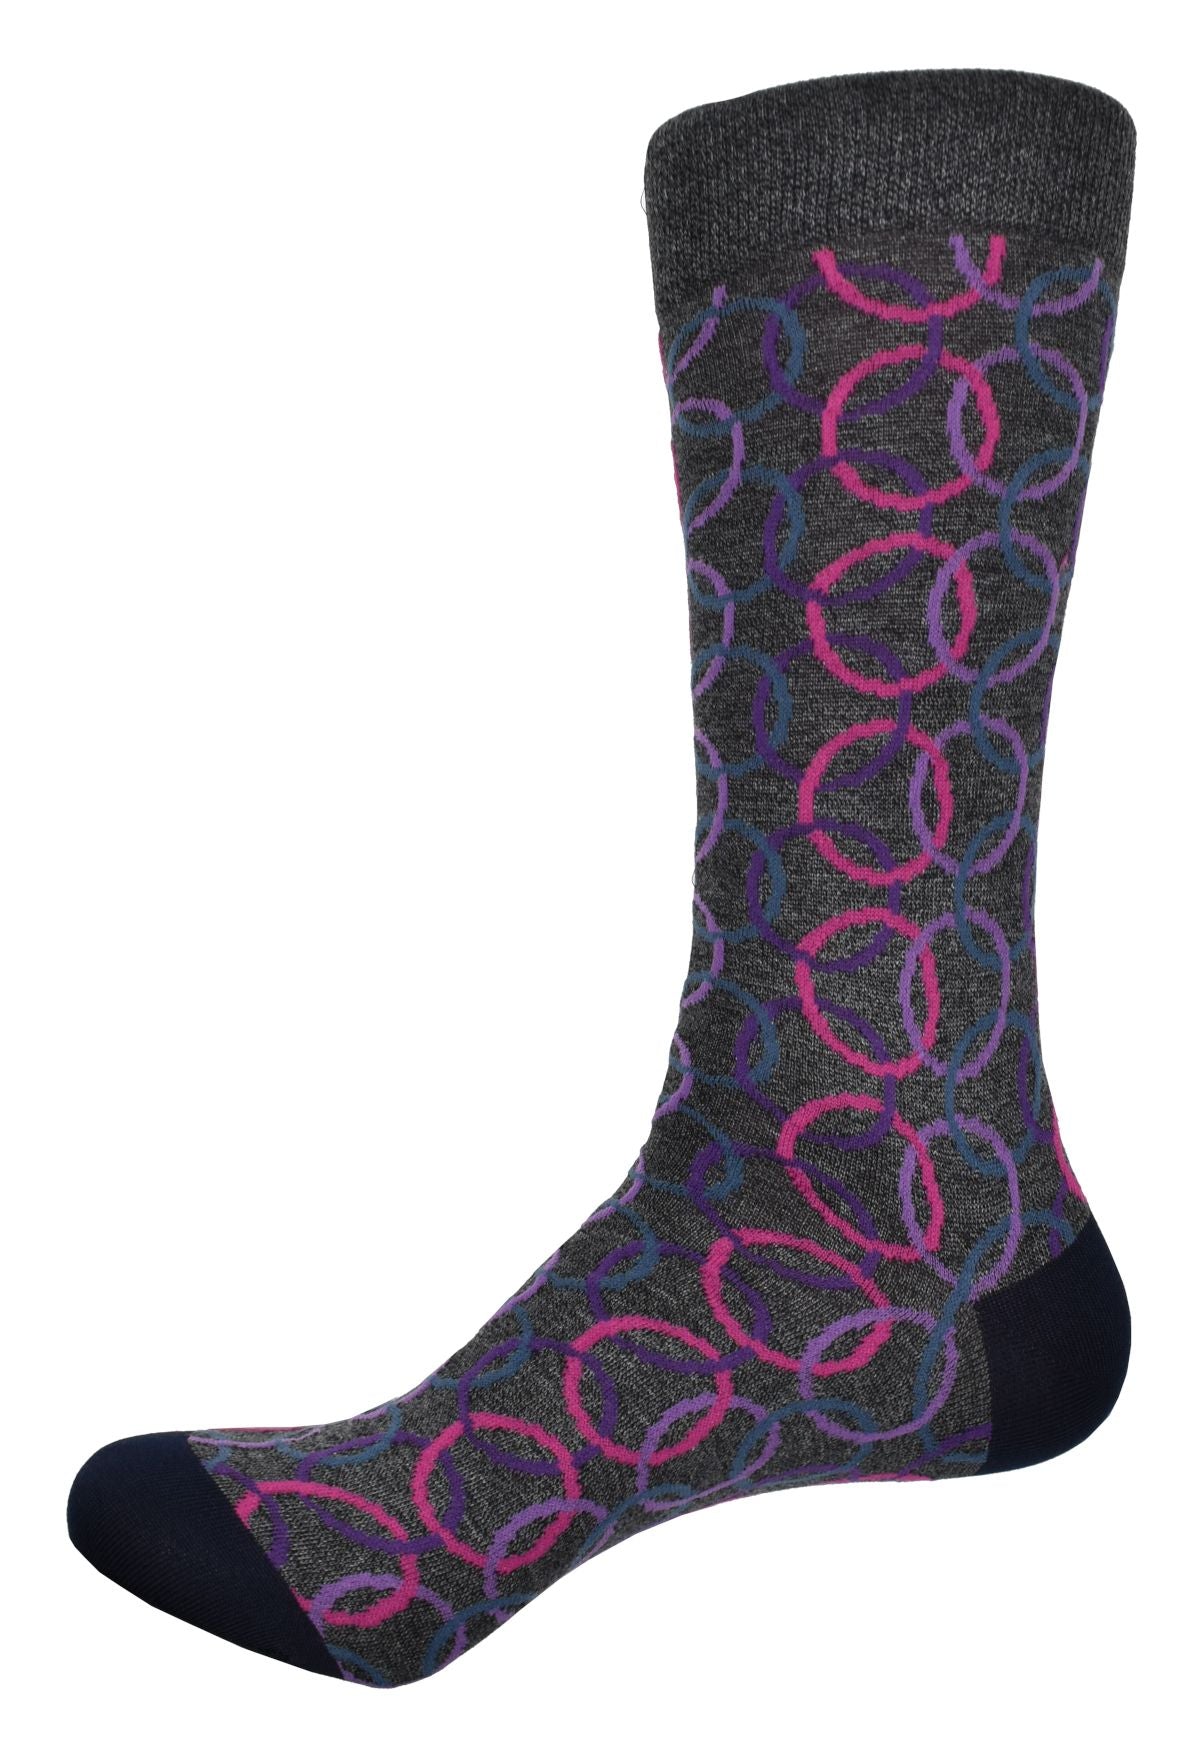 Exquisite Dion collection socks are knitted with extra fine mercerized cottons. The result is a rich feeling sock with crisp color depth.  Charcoal base with colored interlocking circles.  Mid to upper calf height.  Sizes 8-12.